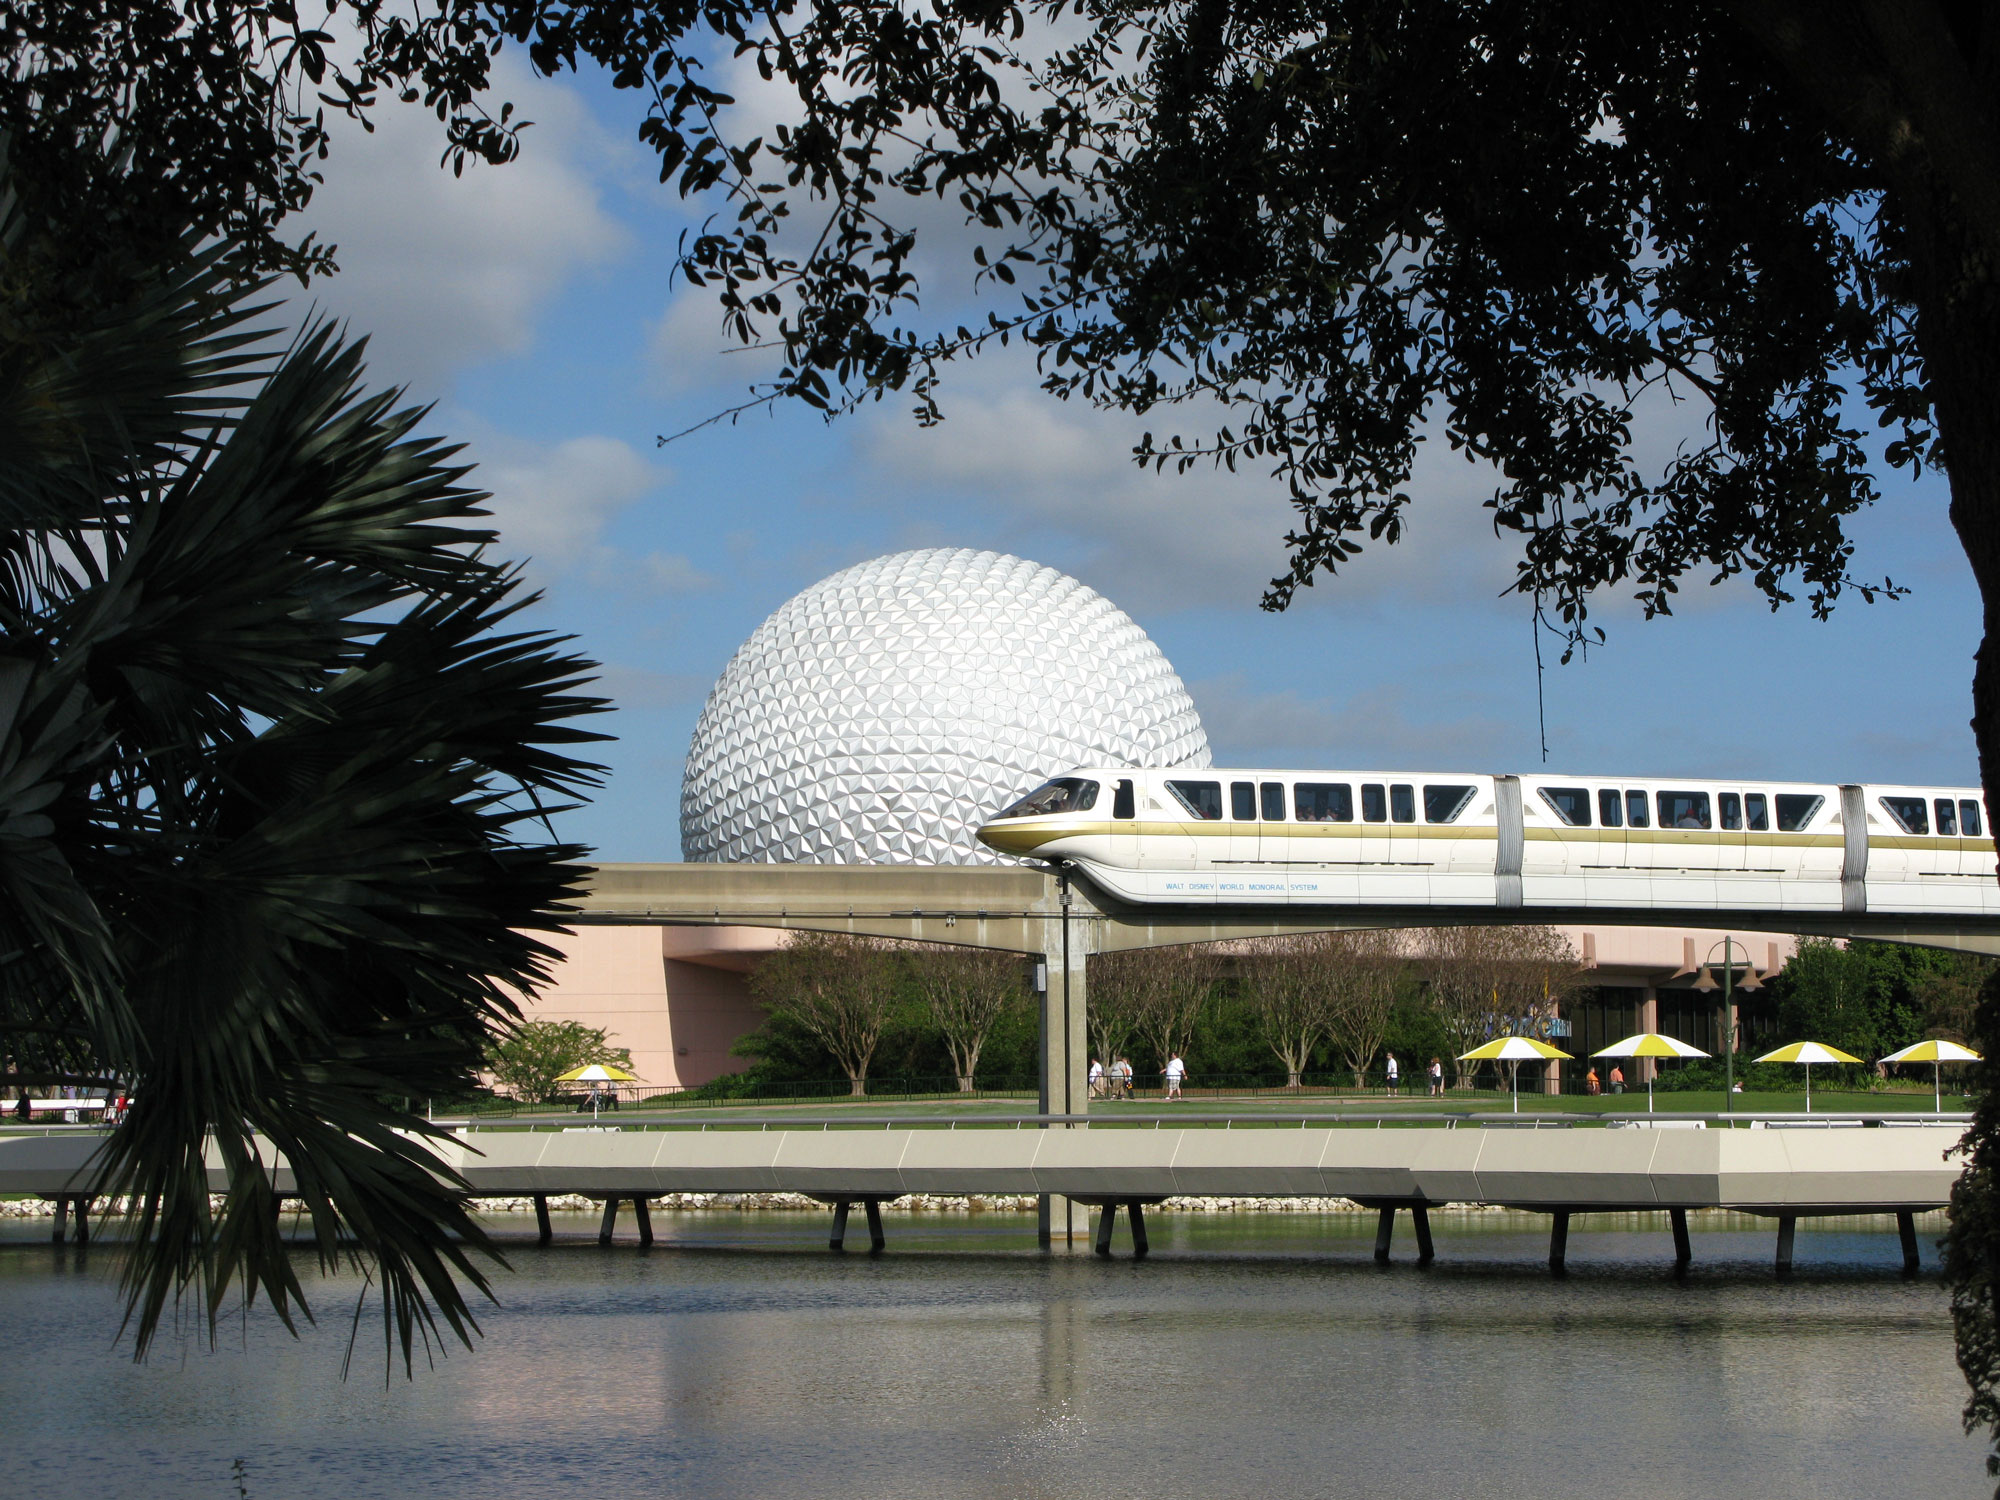 Spaceship Earth with gold monorail